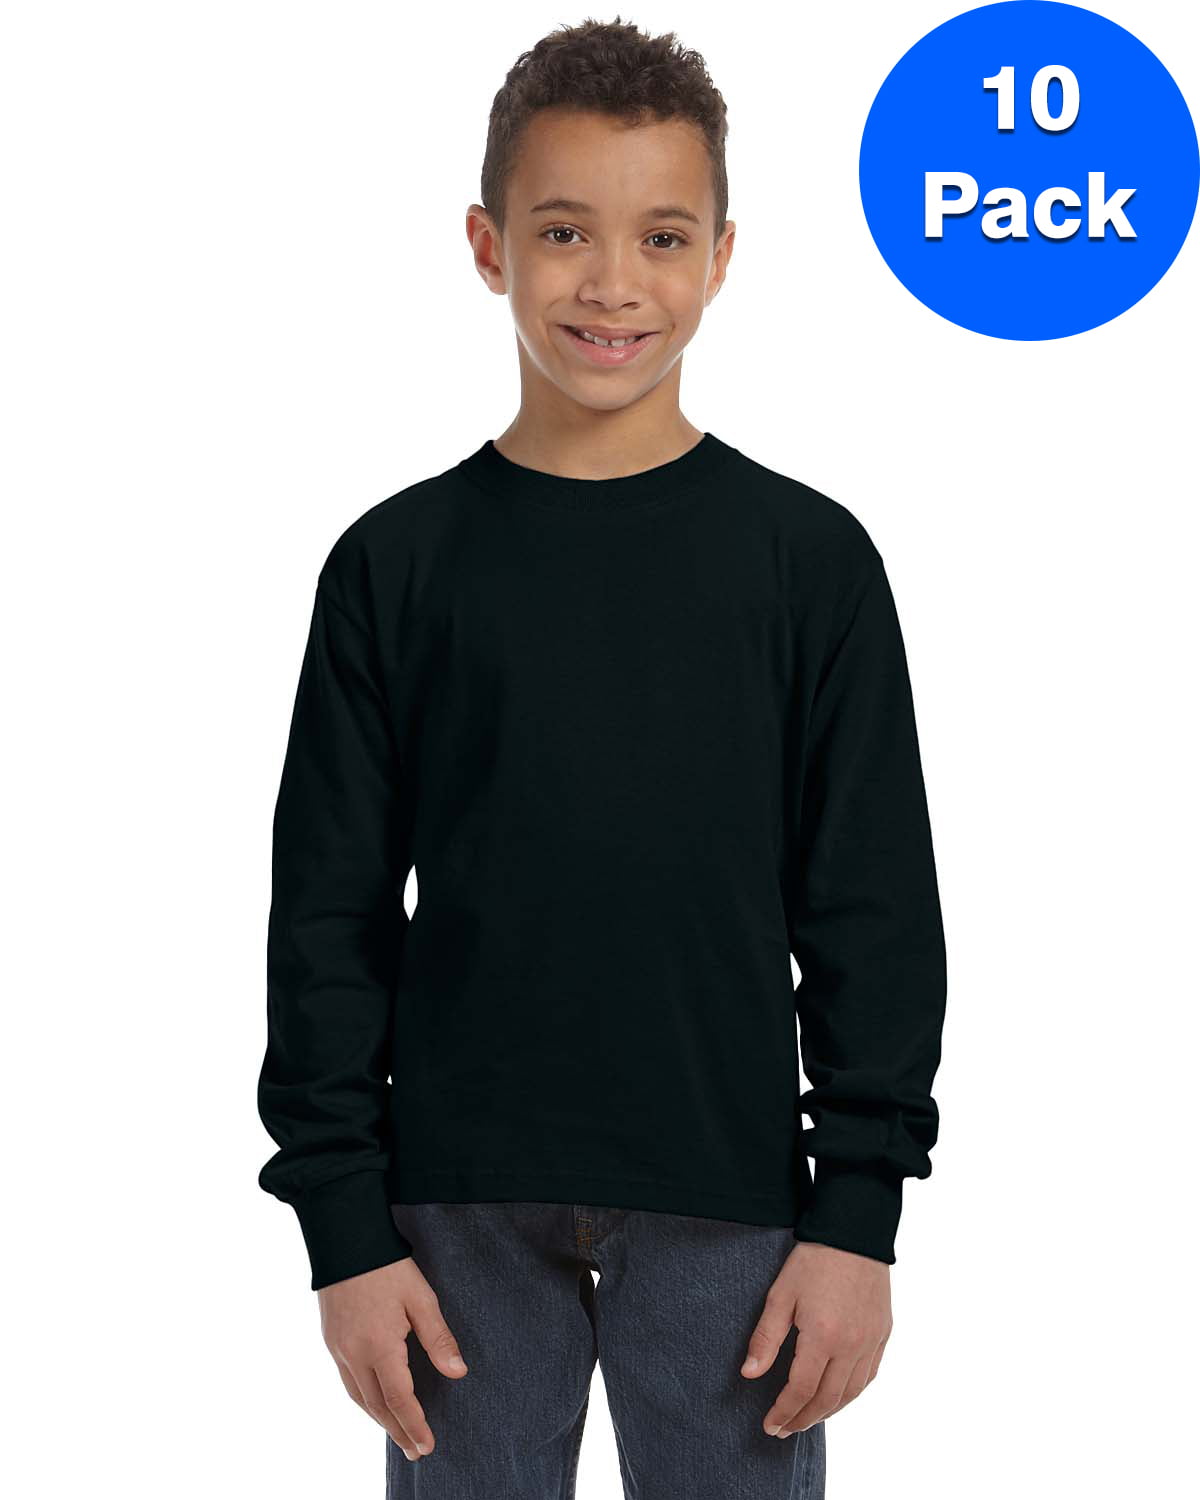 3 Or 5 Pack FOTL Children's Kids 100% Cotton Long Sleeve Valueweight T shirt Top 